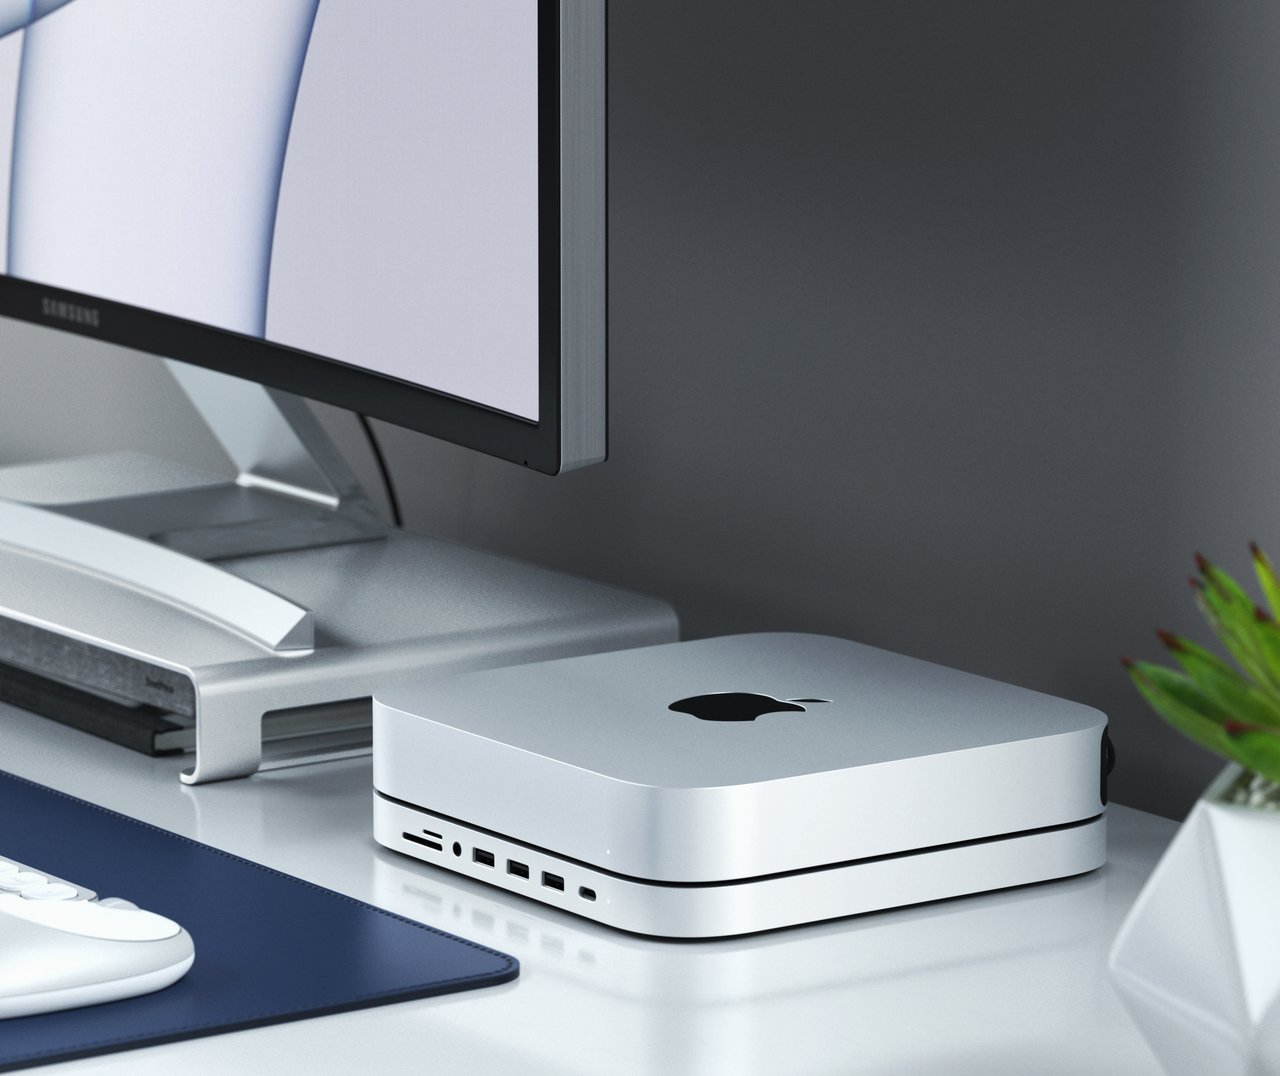 satechi aluminium stand and hub for mac mini with ssd enclosure (silver)